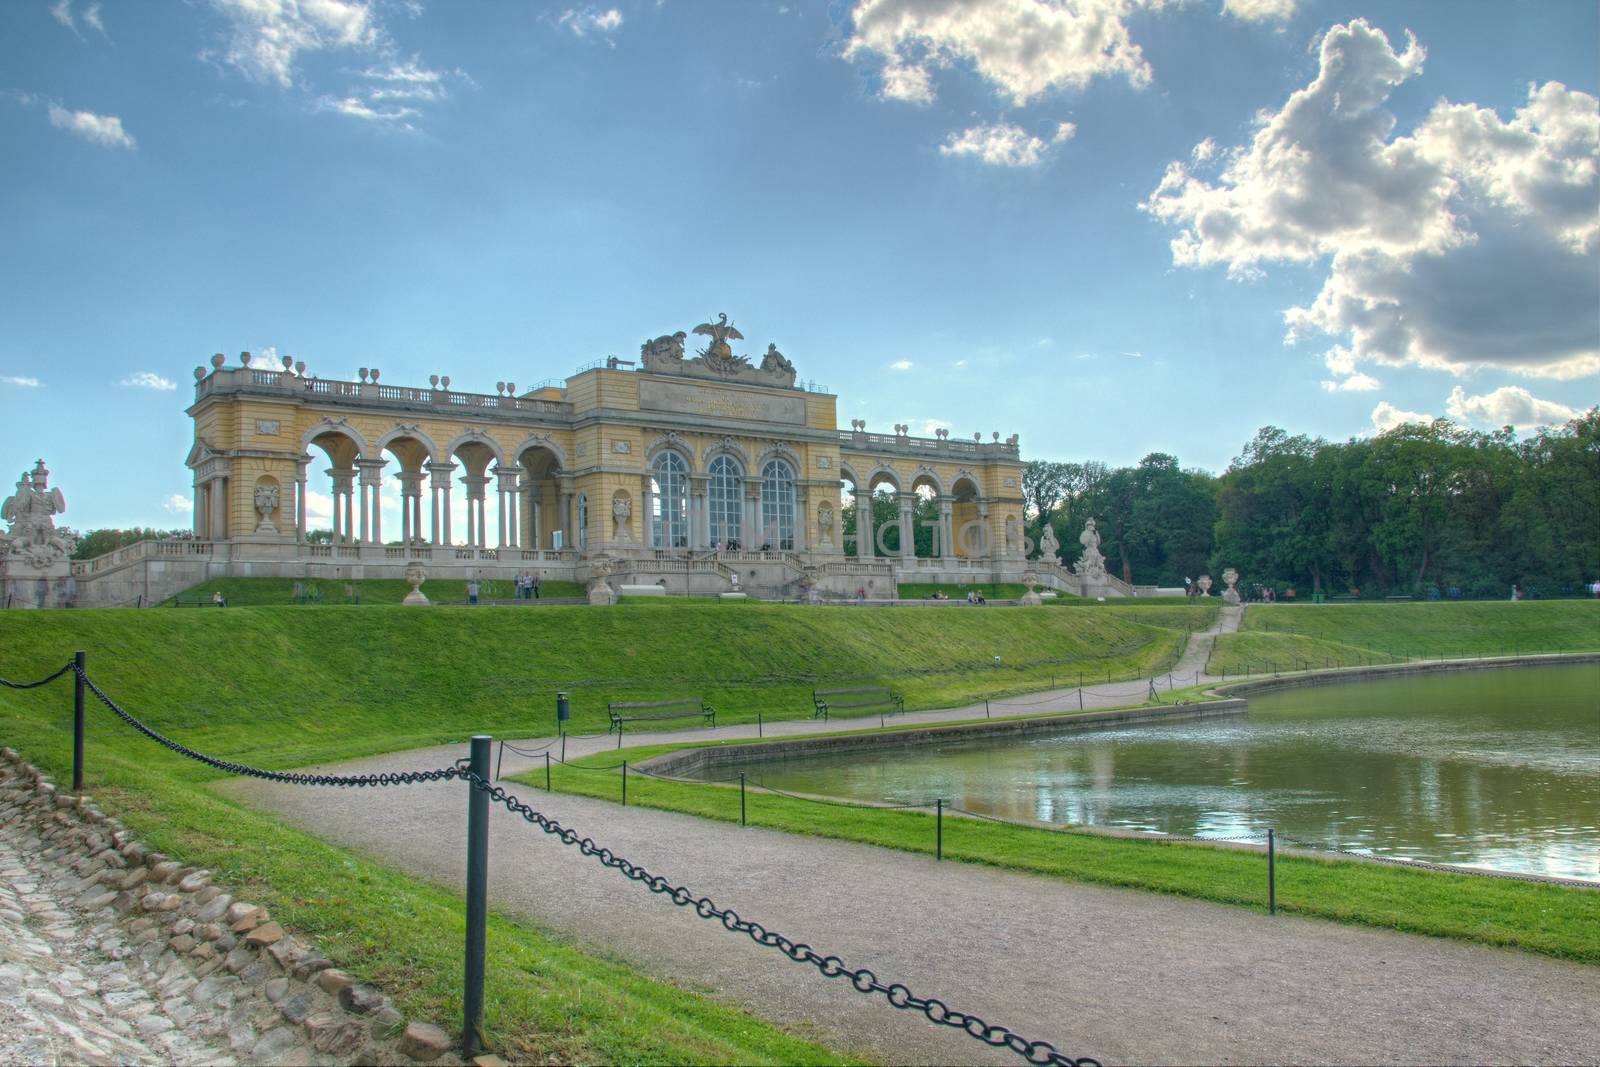 Photo shows general view of garden of Schonbrunn Palace.